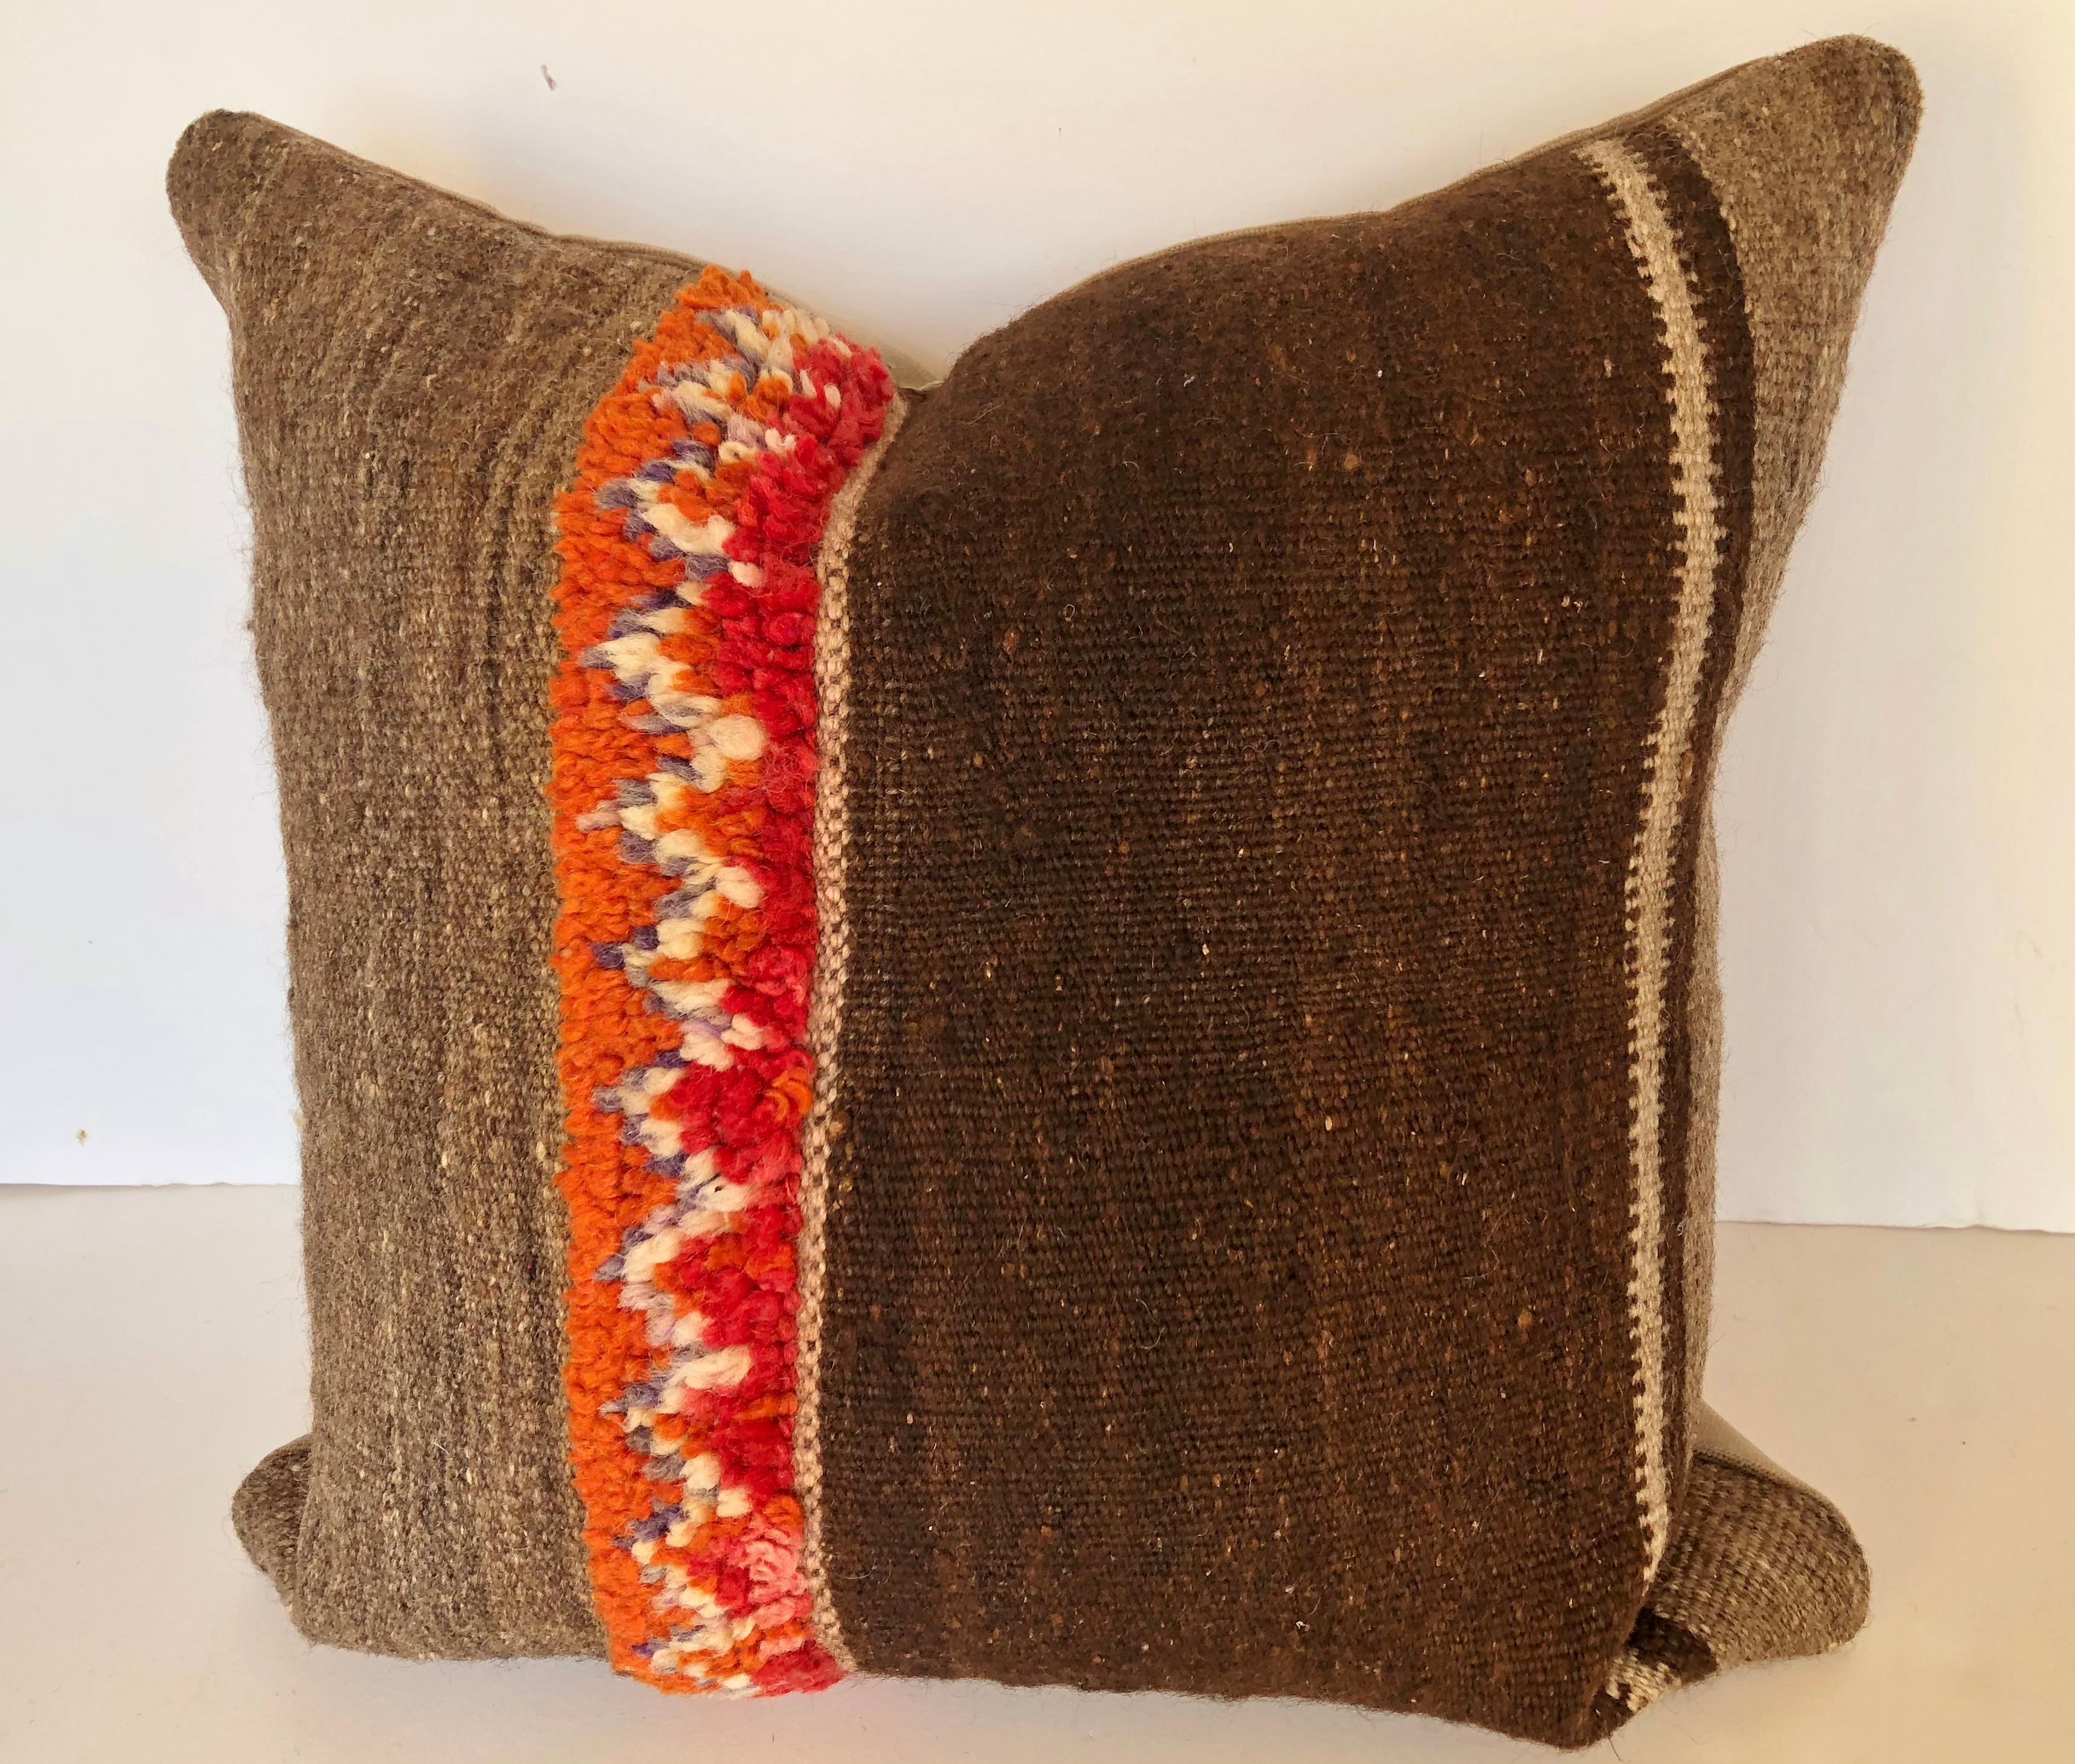 Custom pillow cut from a vintage hand loomed wool Moroccan Berber rug from the Atlas Mountains. Wool stripes are embellished with colorful tufted bands. Pillow is backed in velvet, filled with an insert of 50/50 down and feathers and handsewn